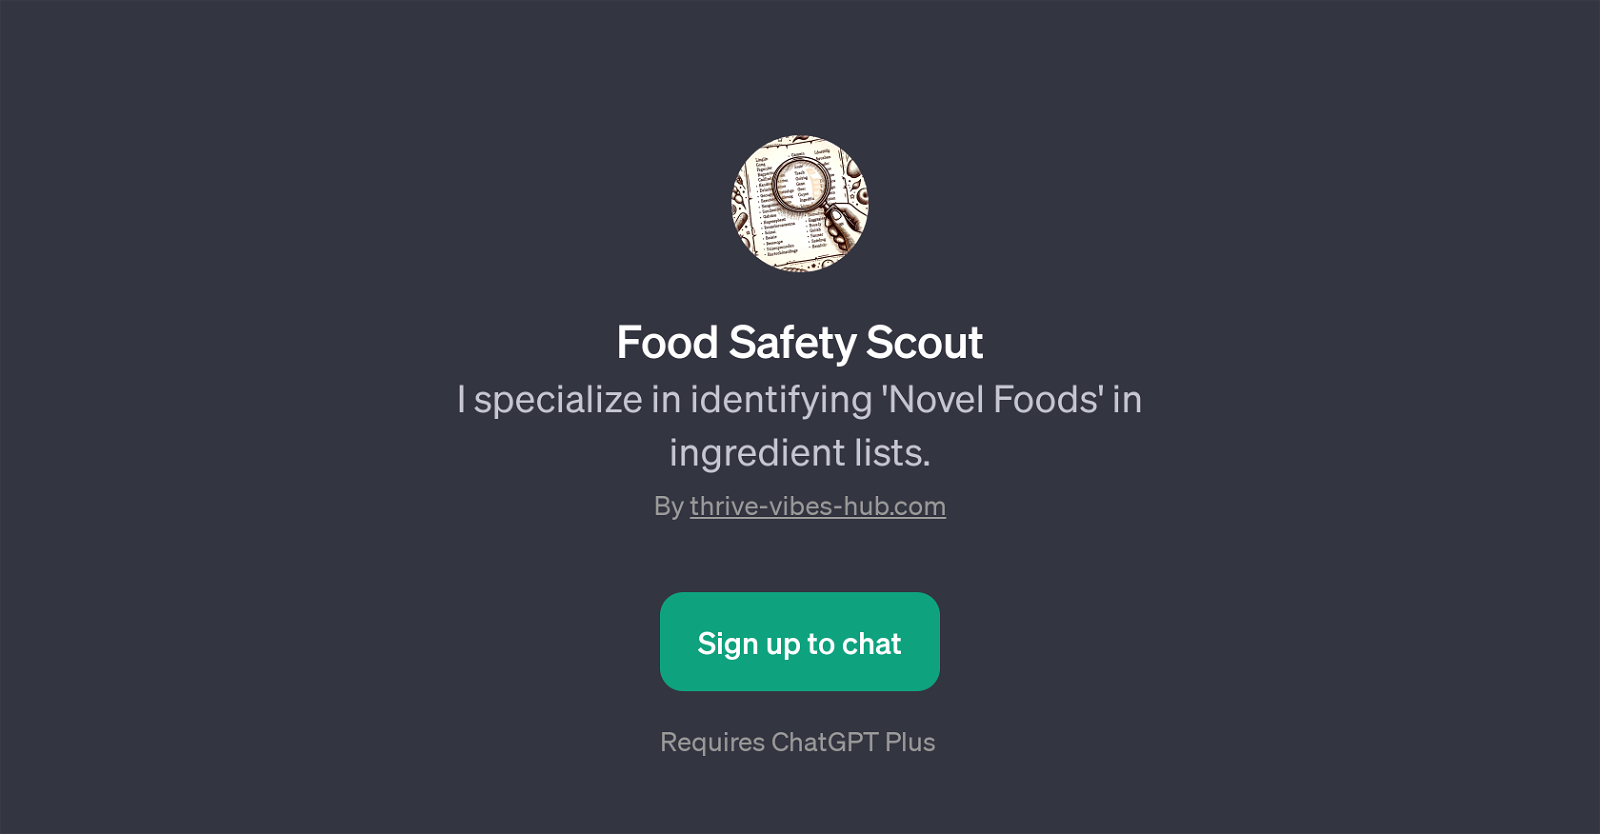 Food Safety Scout website